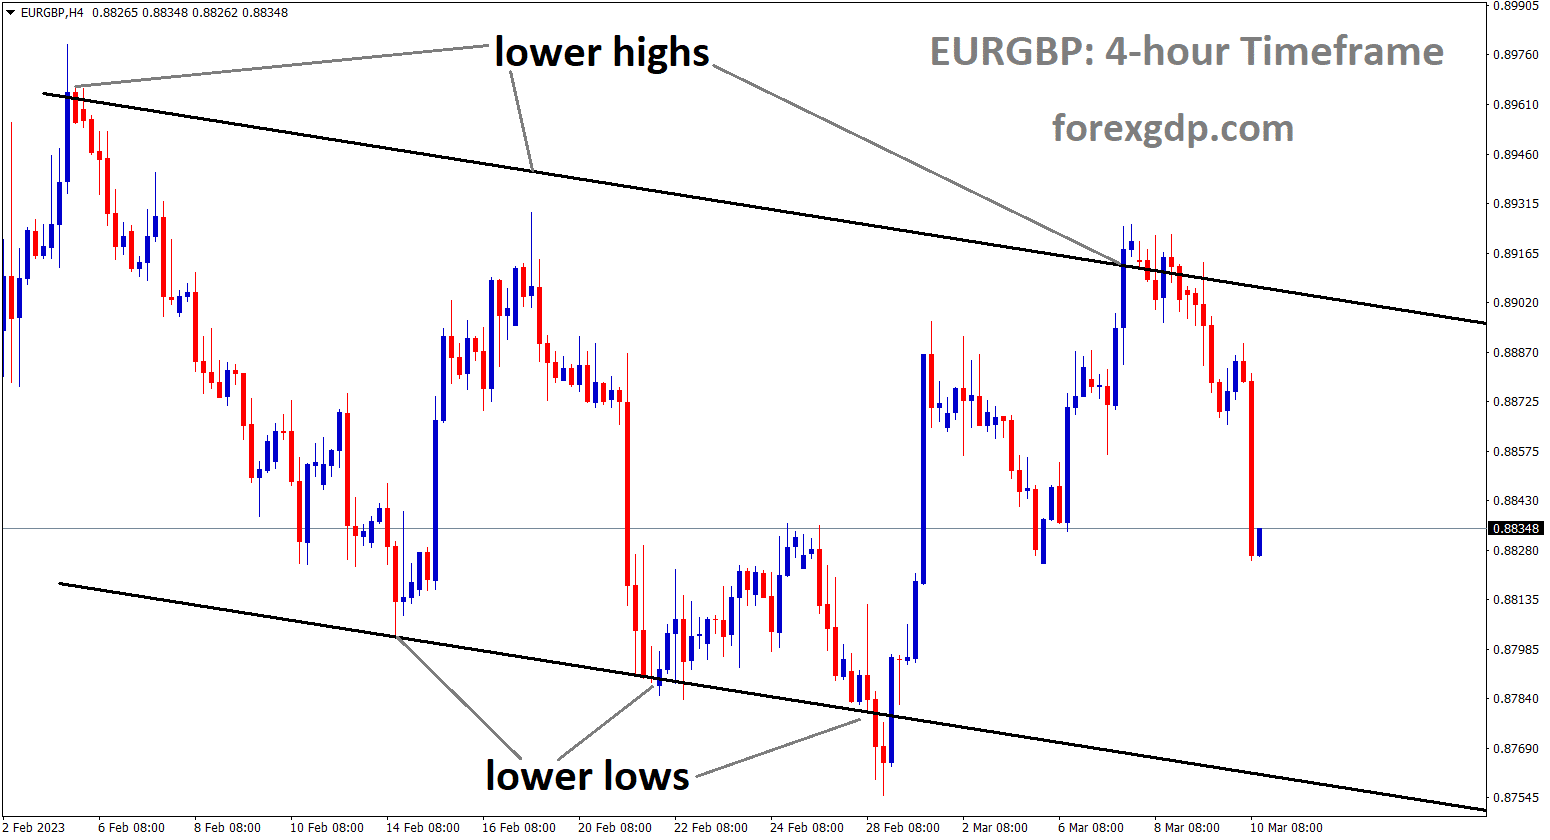 EURGBP is moving in Descending channel and the market has fallen from the lower high area of the channel.